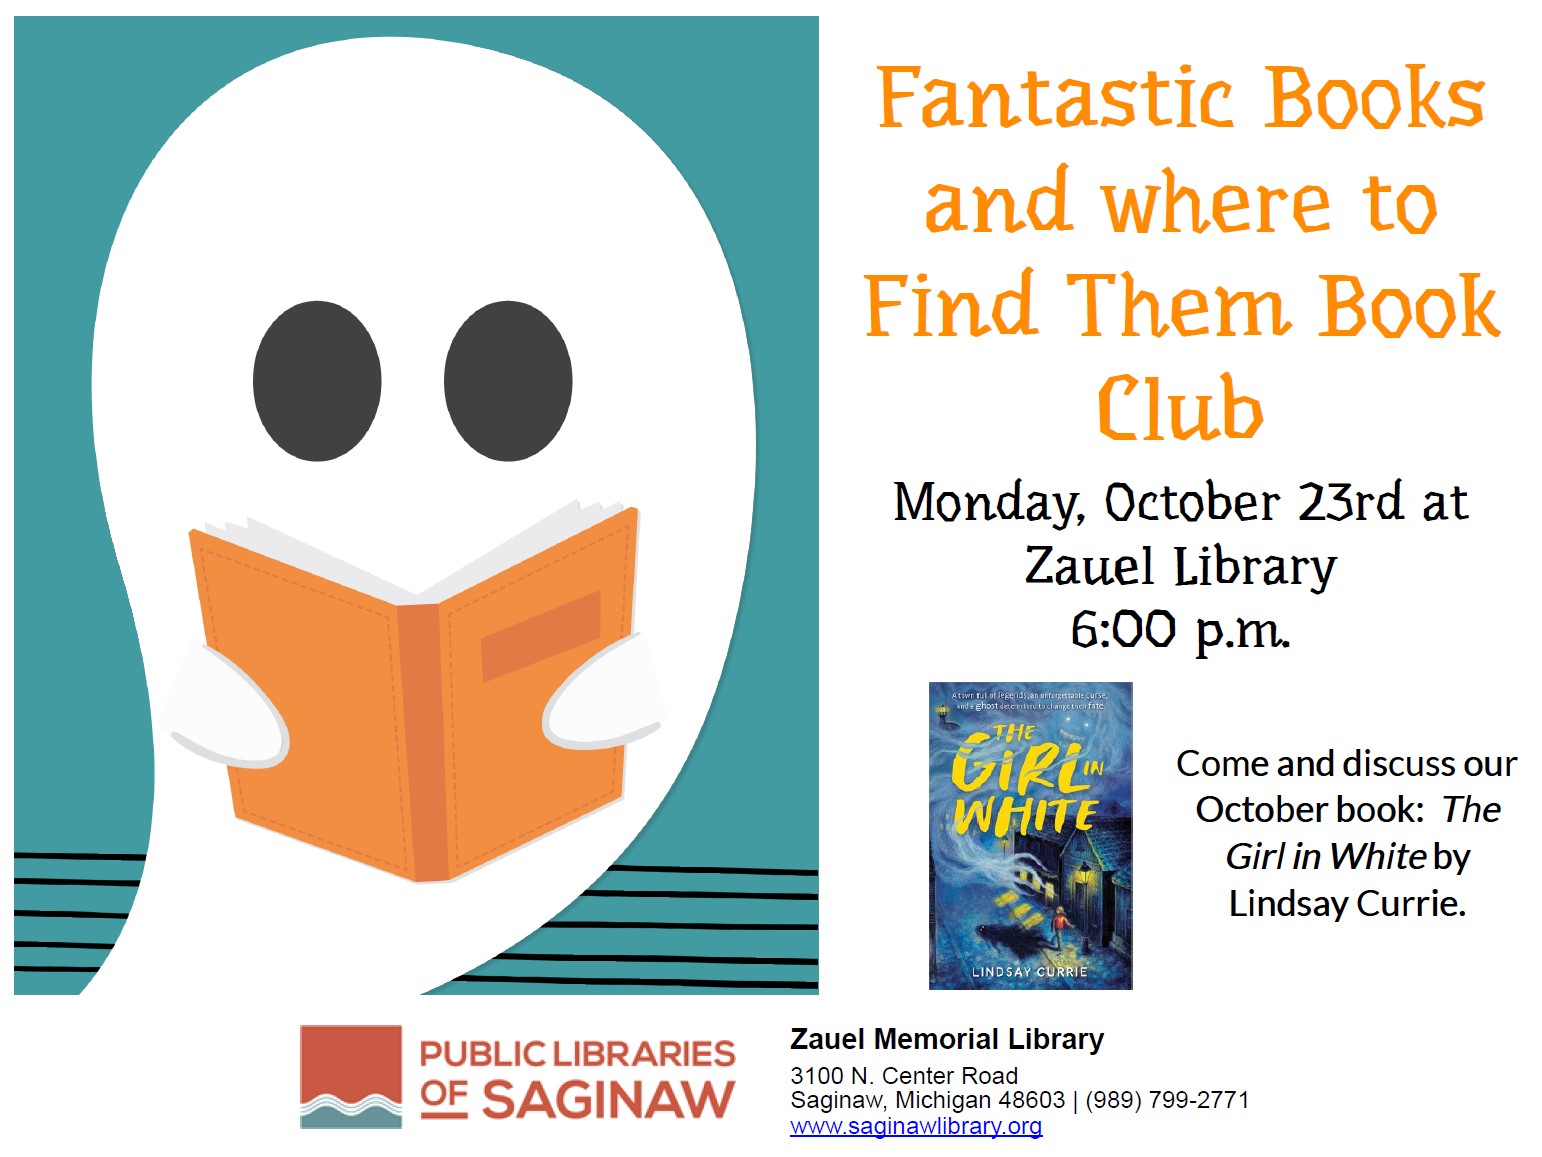 Flyer for Fantastic Books Book Club